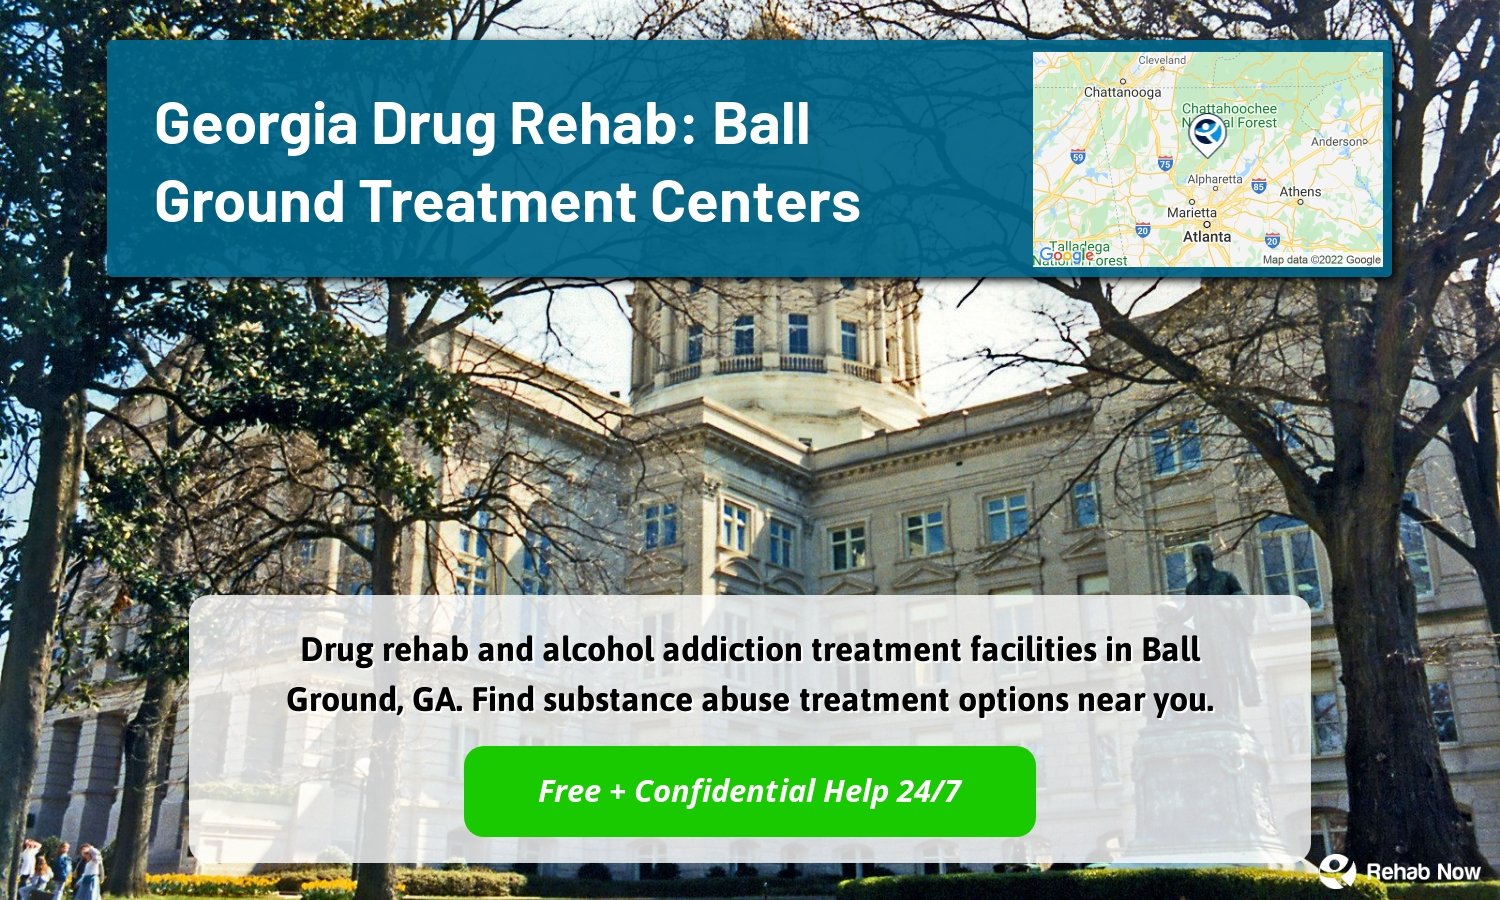 Drug rehab and alcohol addiction treatment facilities in Ball Ground, GA. Find substance abuse treatment options near you.